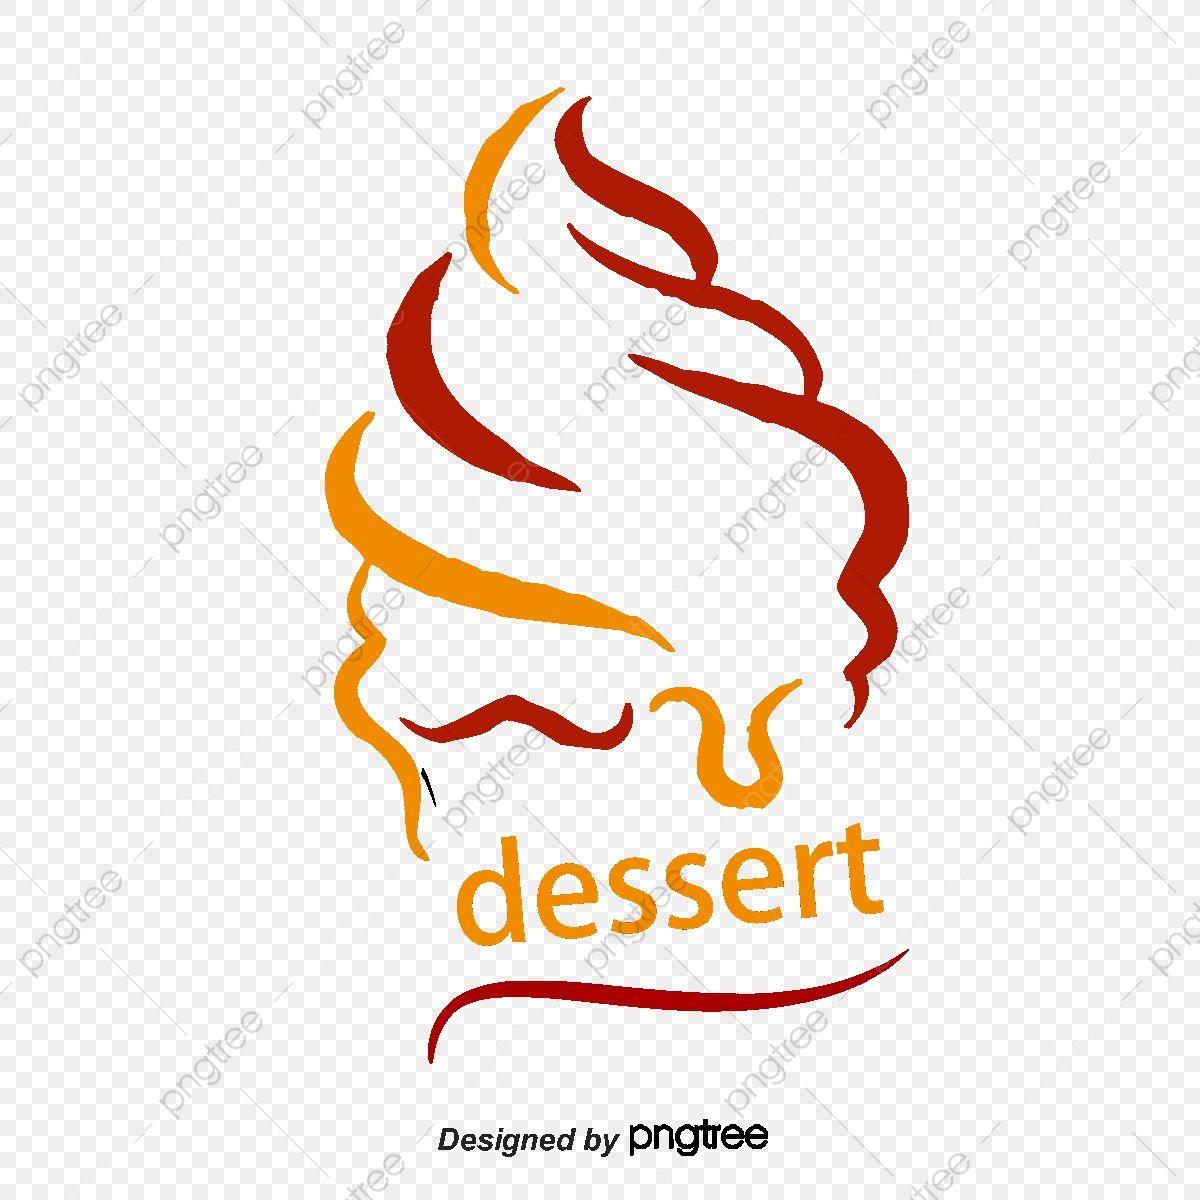 Dessert Logo - Dessert Logo, Vector, Logo, Logo Vector PNG and Vector